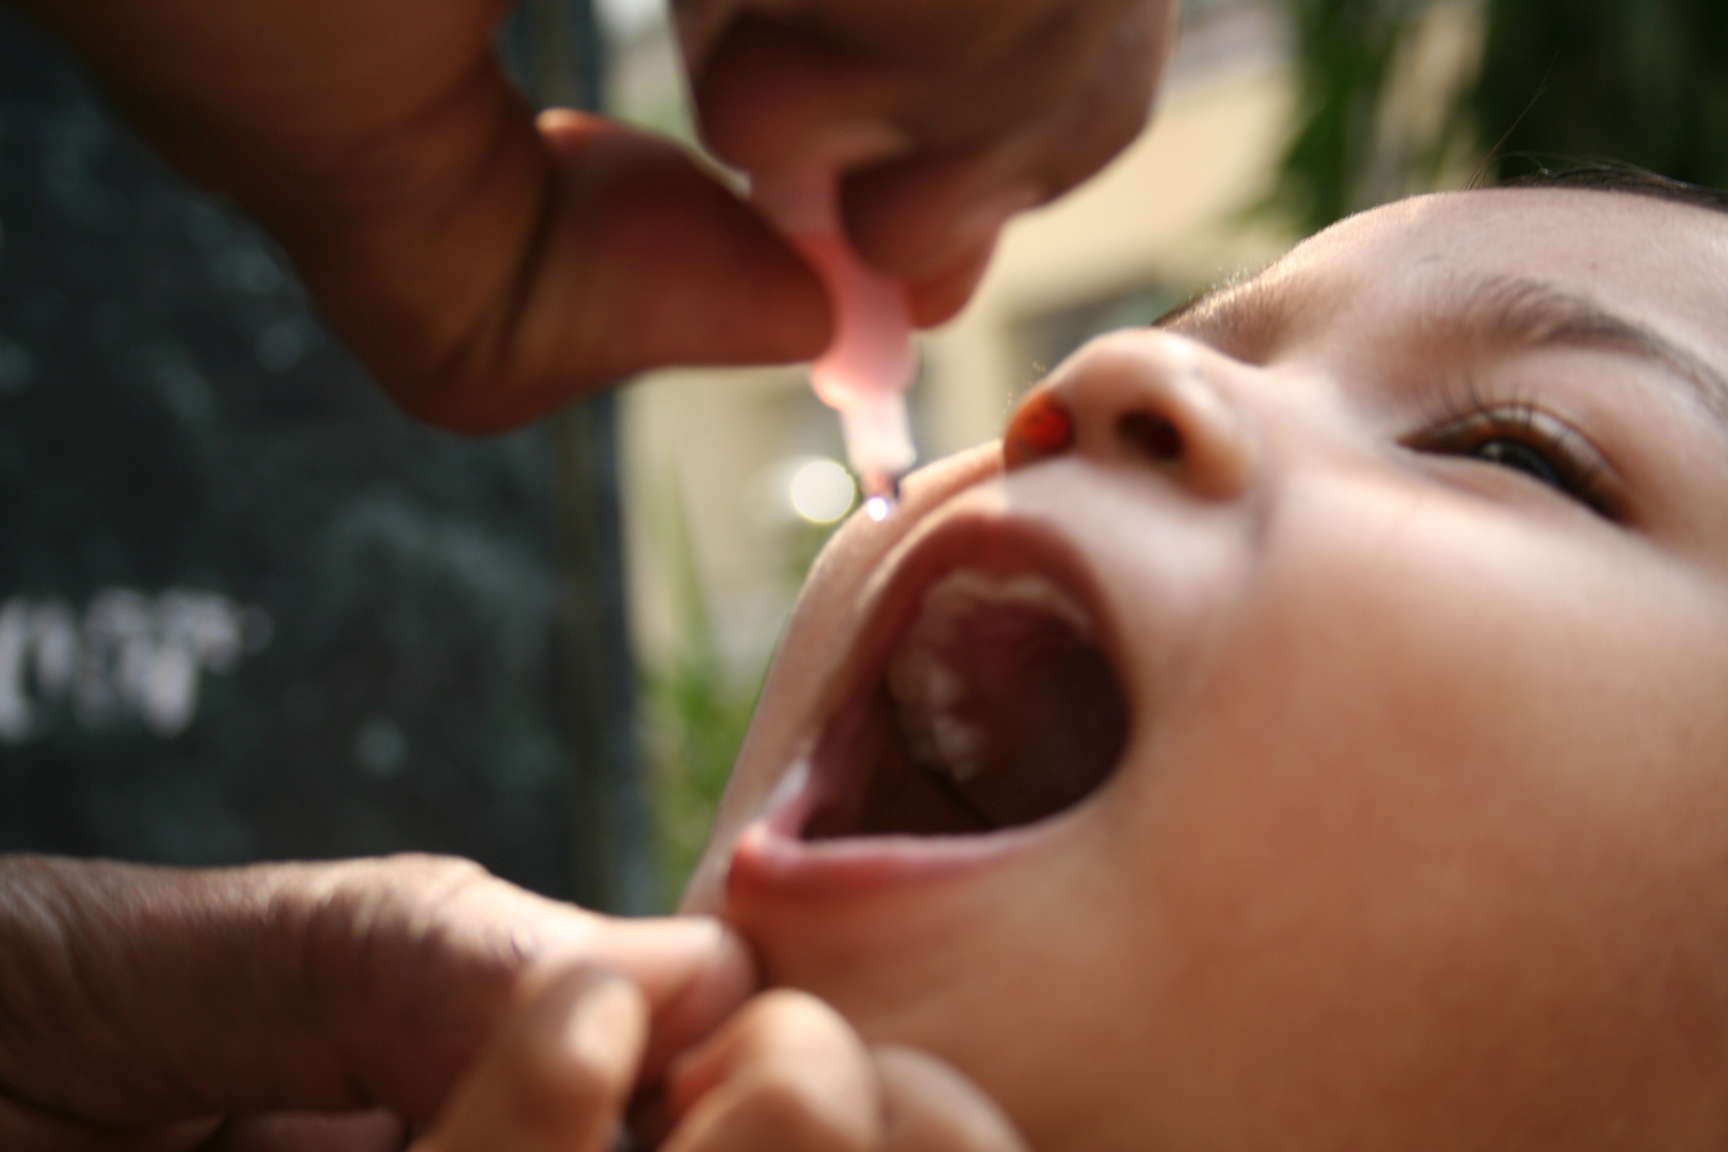 Oral polio vaccine can cause vaccine-derived poliovirus infection